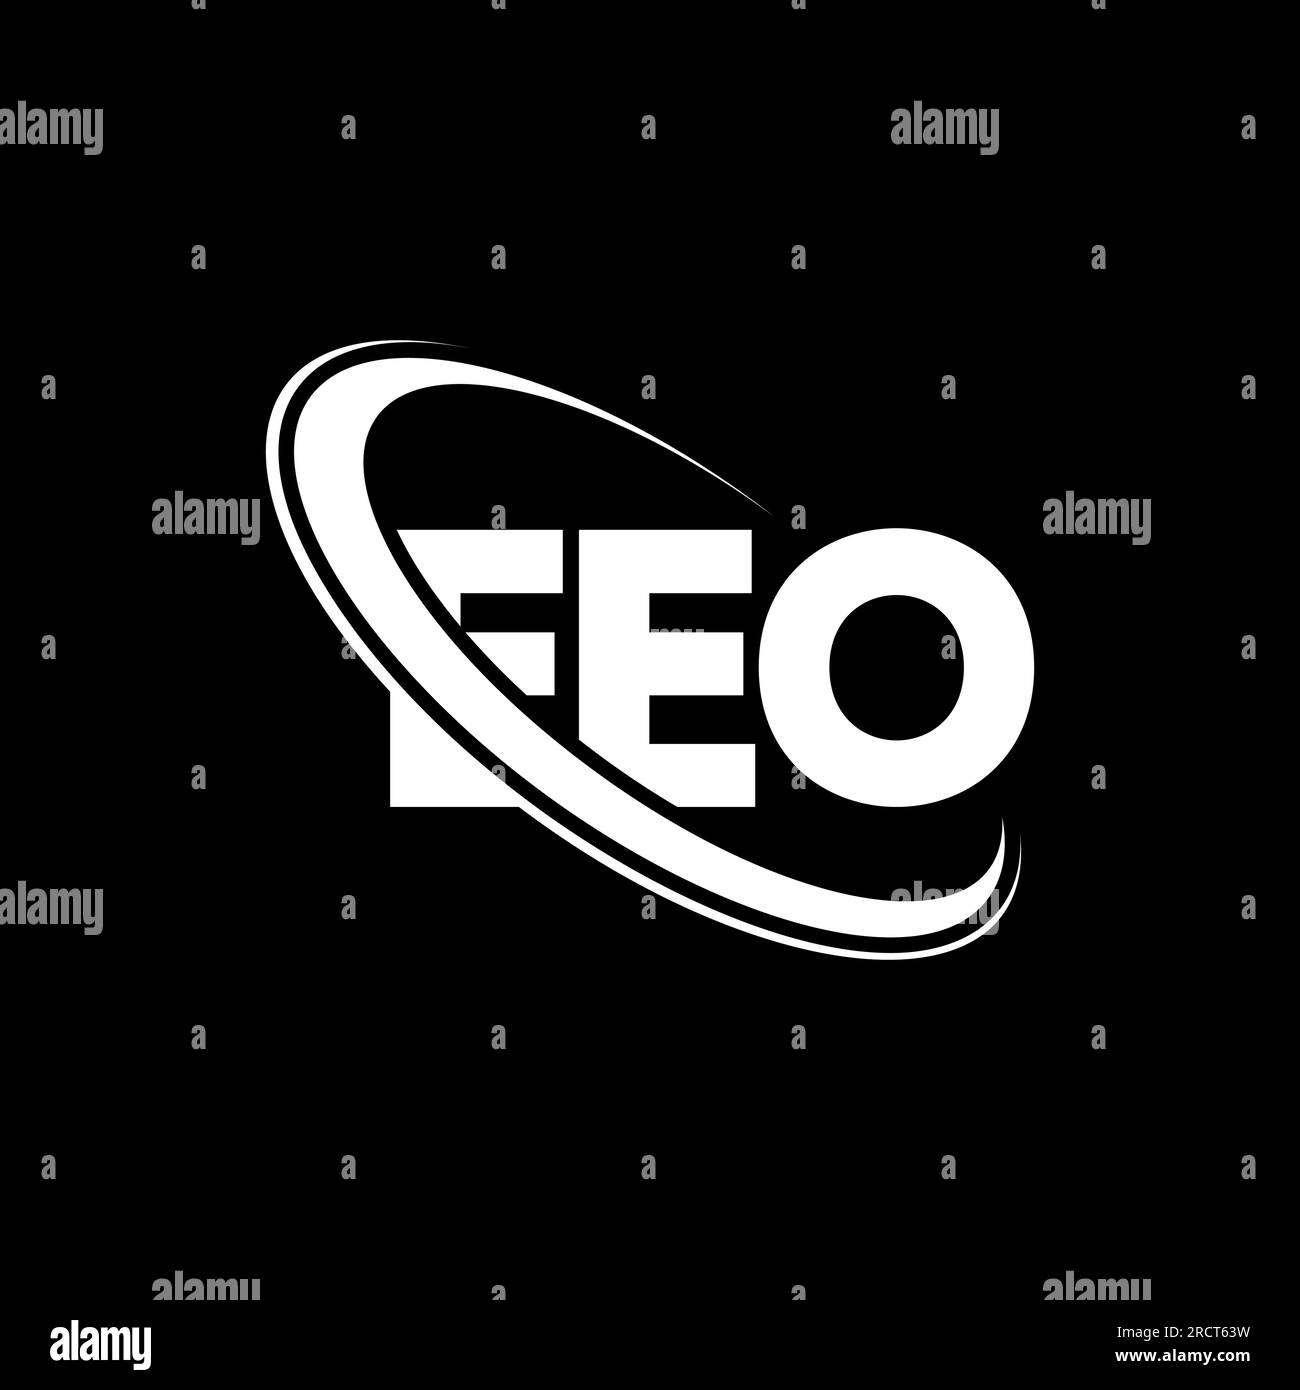 EEO logo. EEO letter. EEO letter logo design. Initials EEO logo linked with circle and uppercase monogram logo. EEO typography for technology, busines Stock Vector